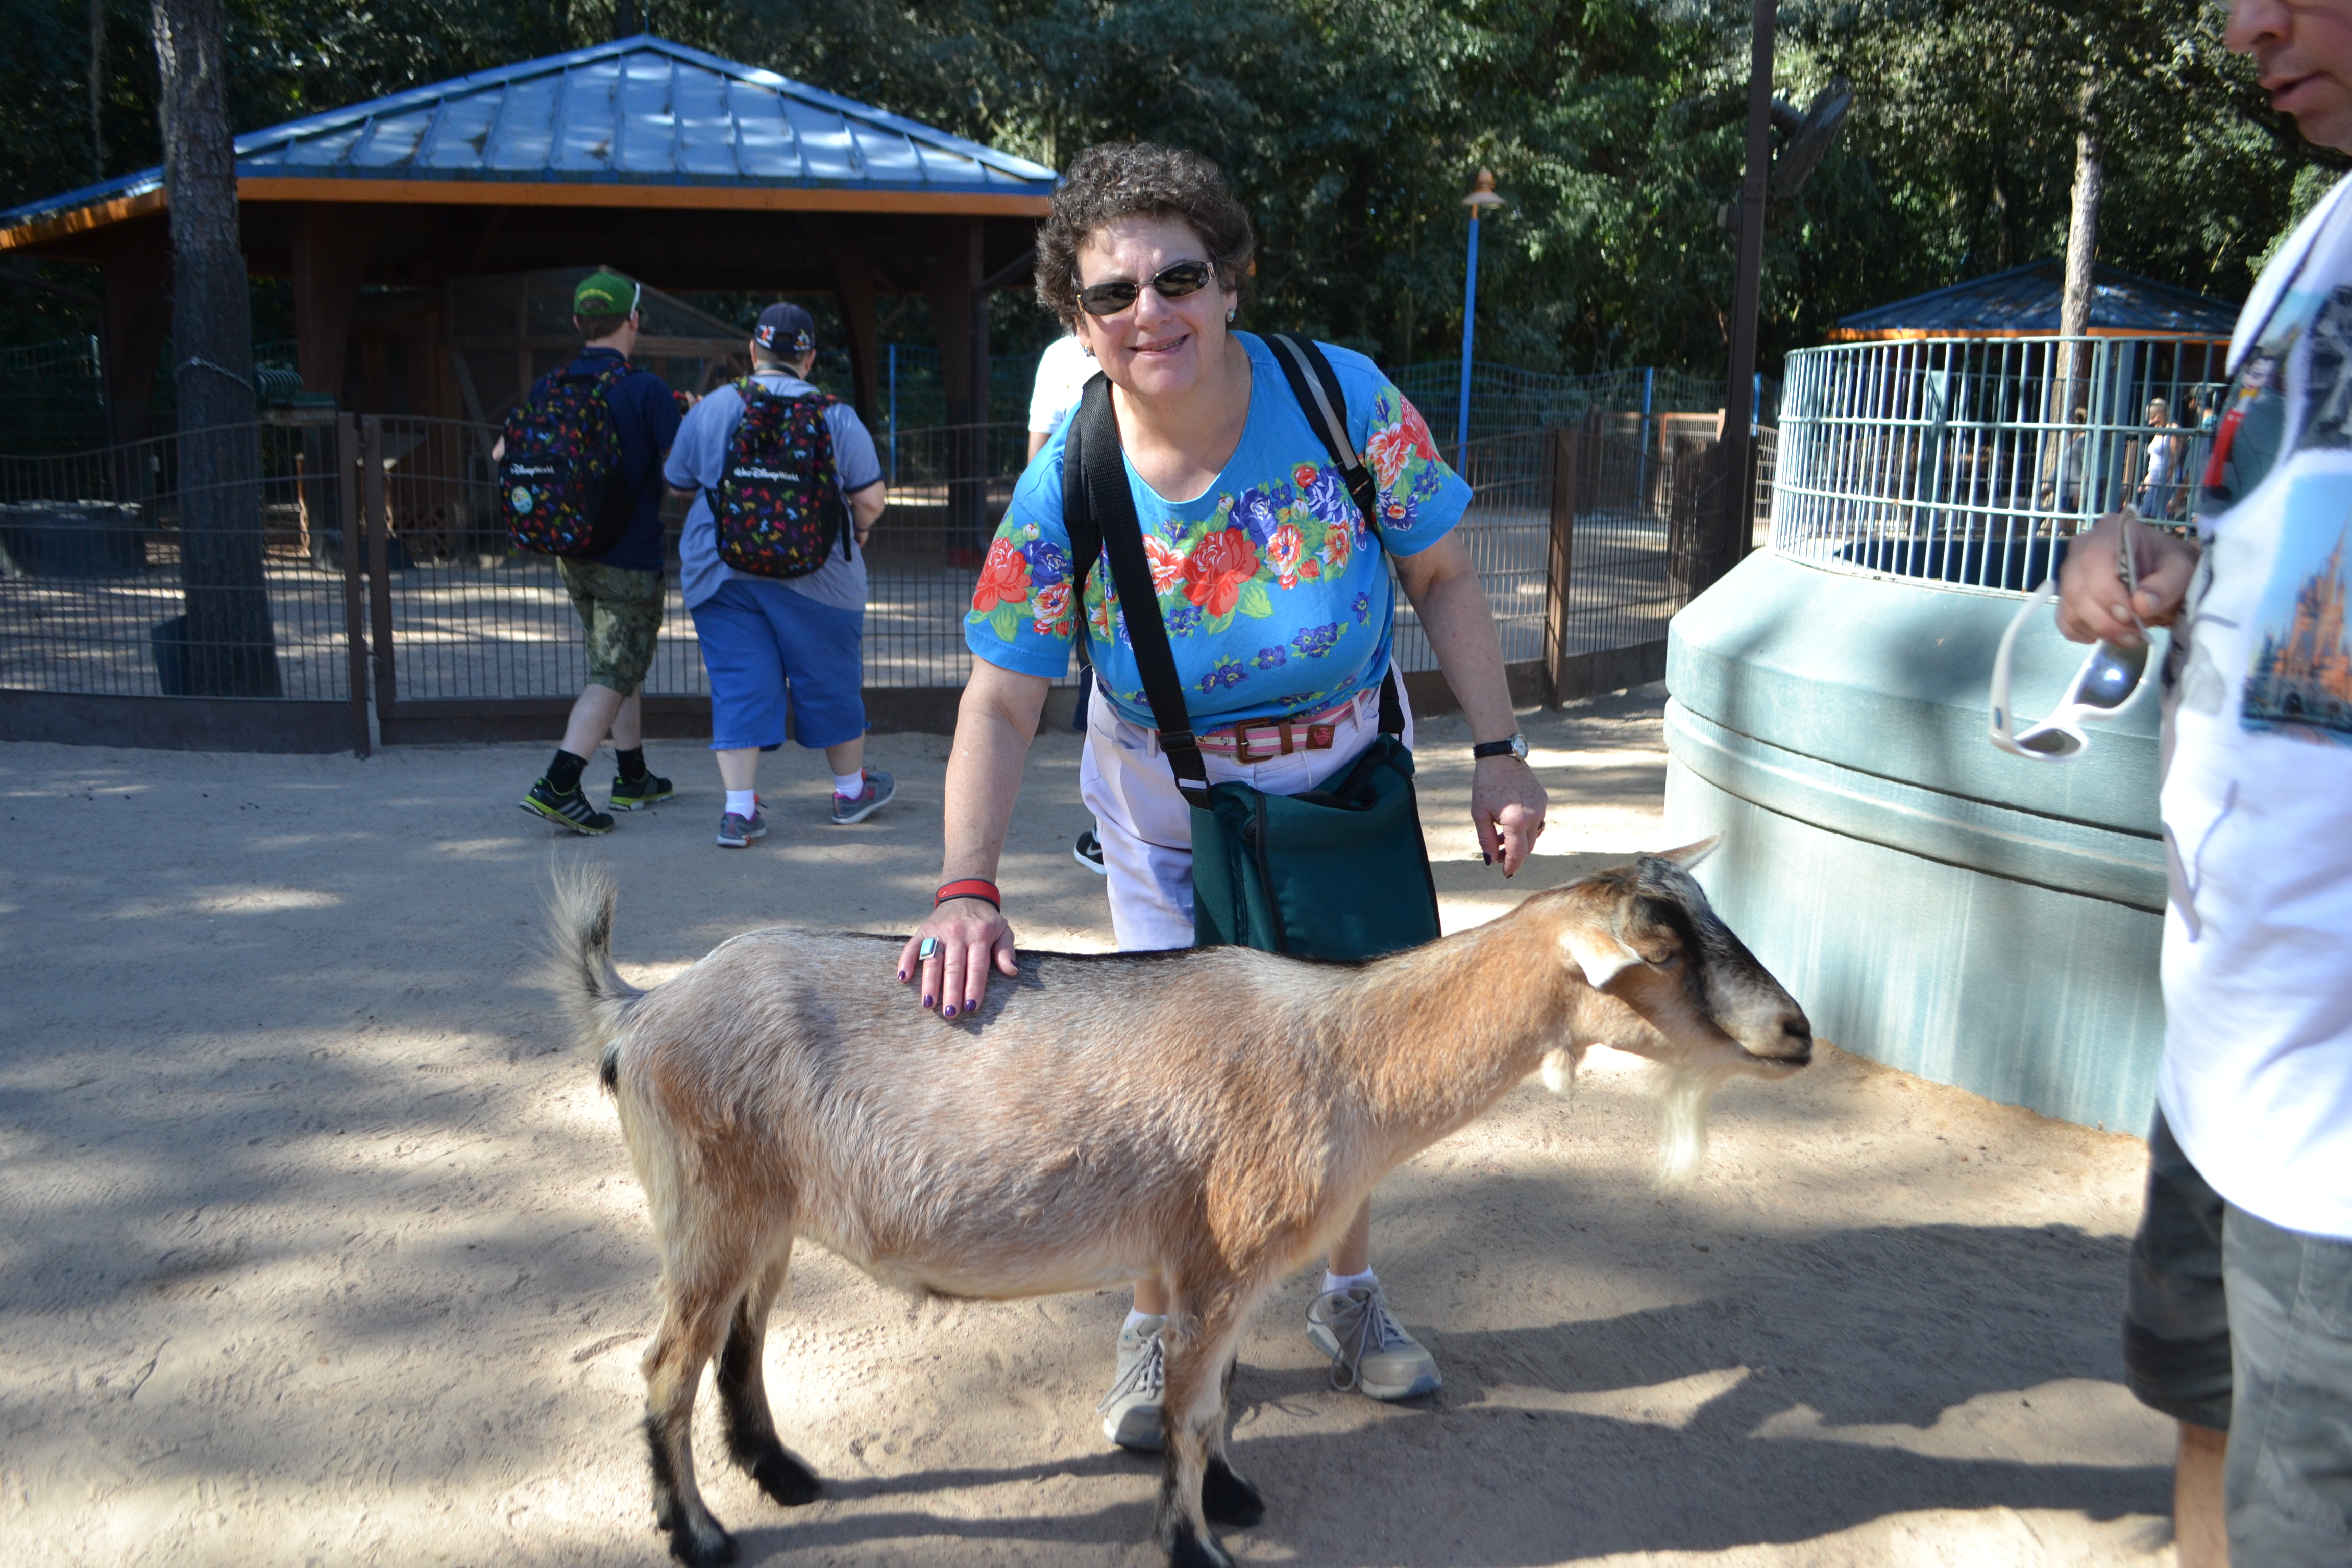 Vacationer petting a goat